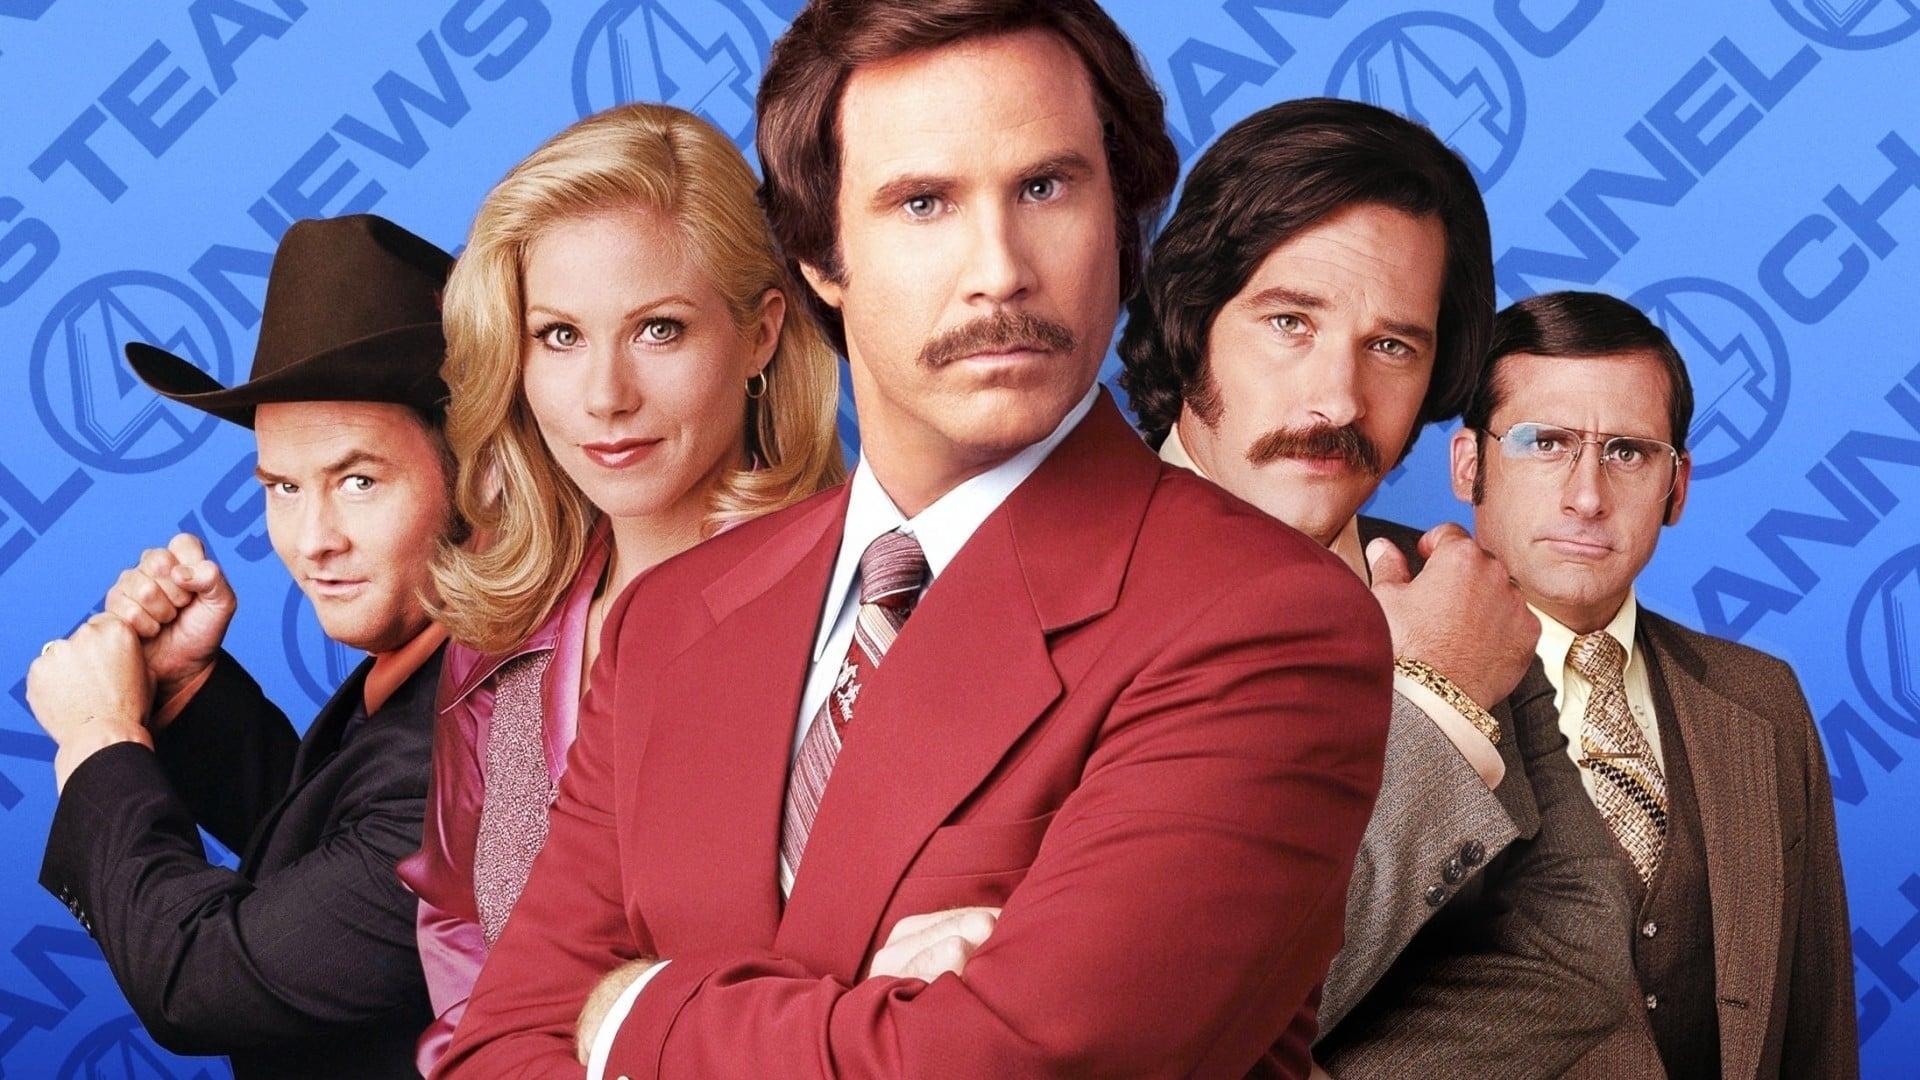 Anchorman: The Legend of Ron Burgundy backdrop